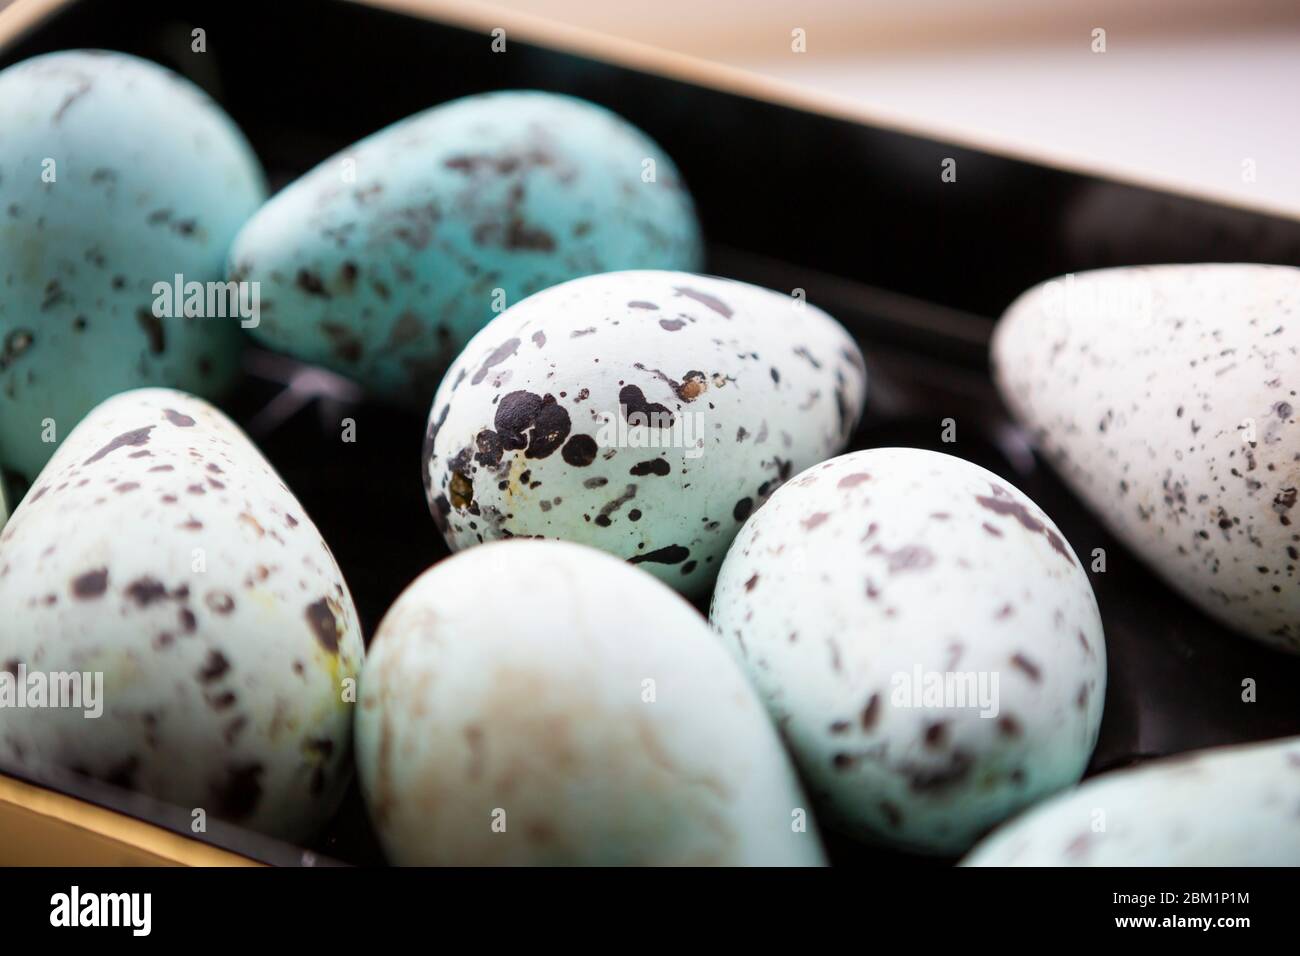 A number of guillemot eggs. Focus is shallow and focused on the center egg. Stock Photo